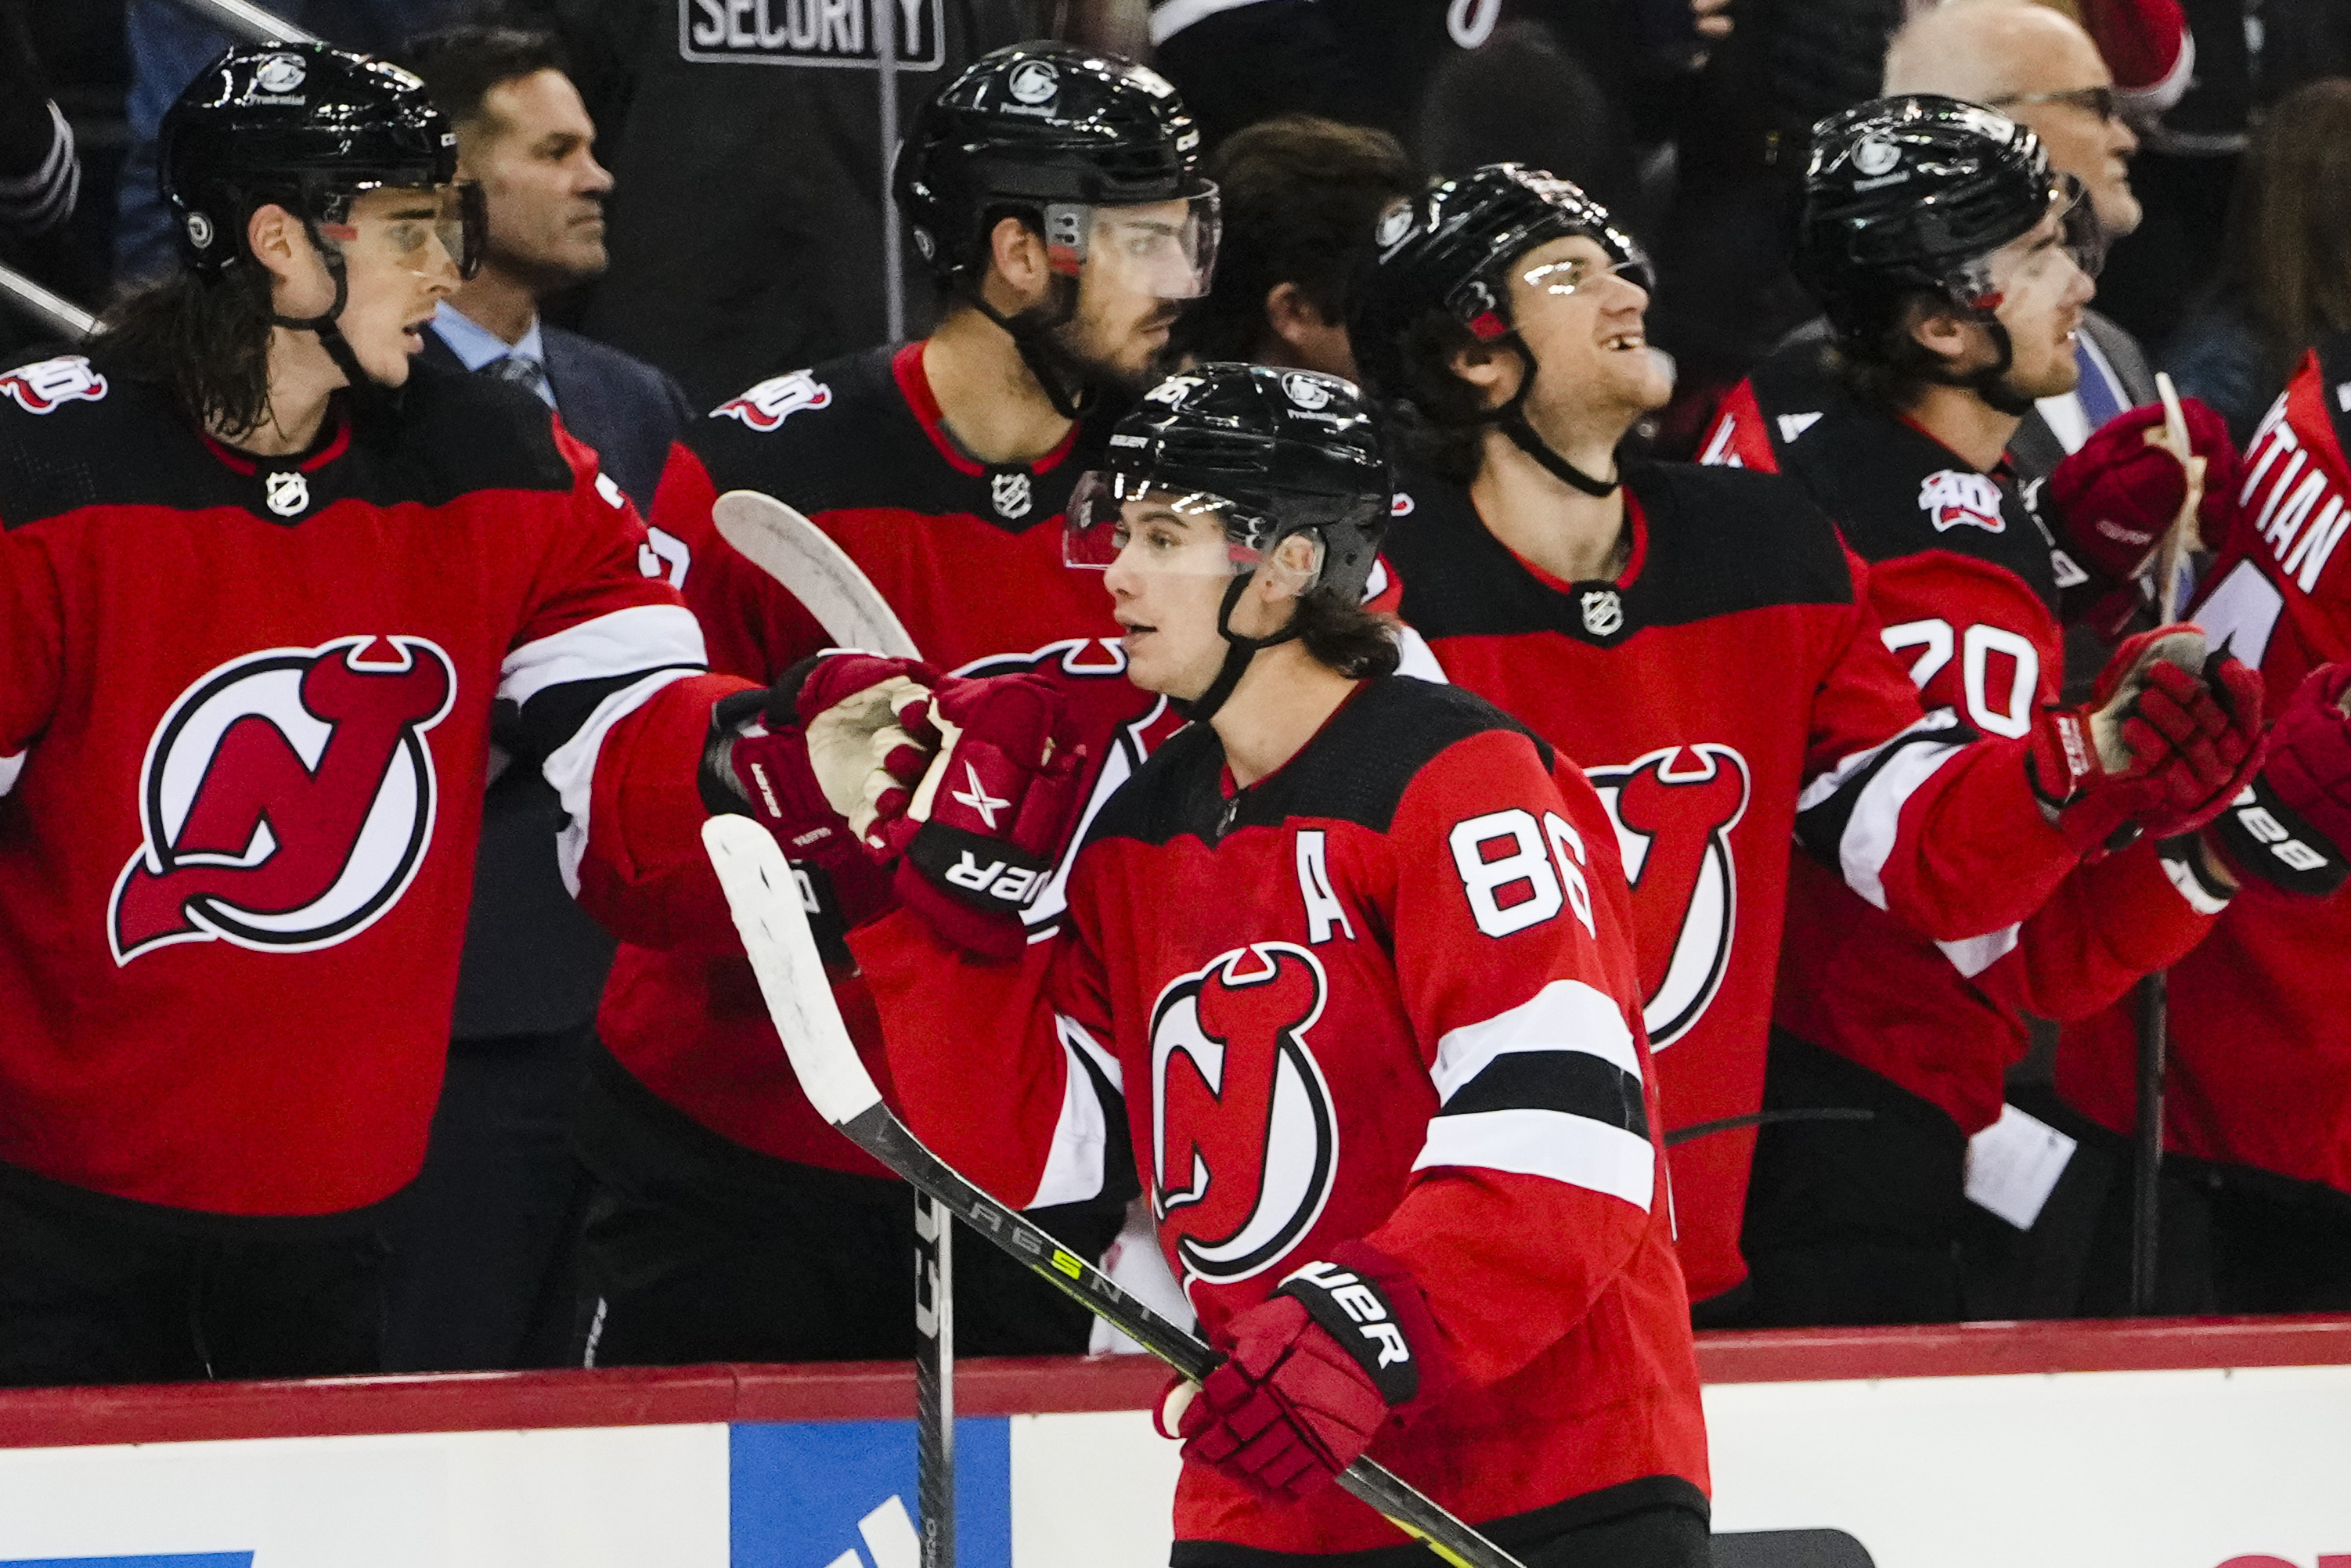 Devils playoff tickets: Look how expensive Devils' 1st round